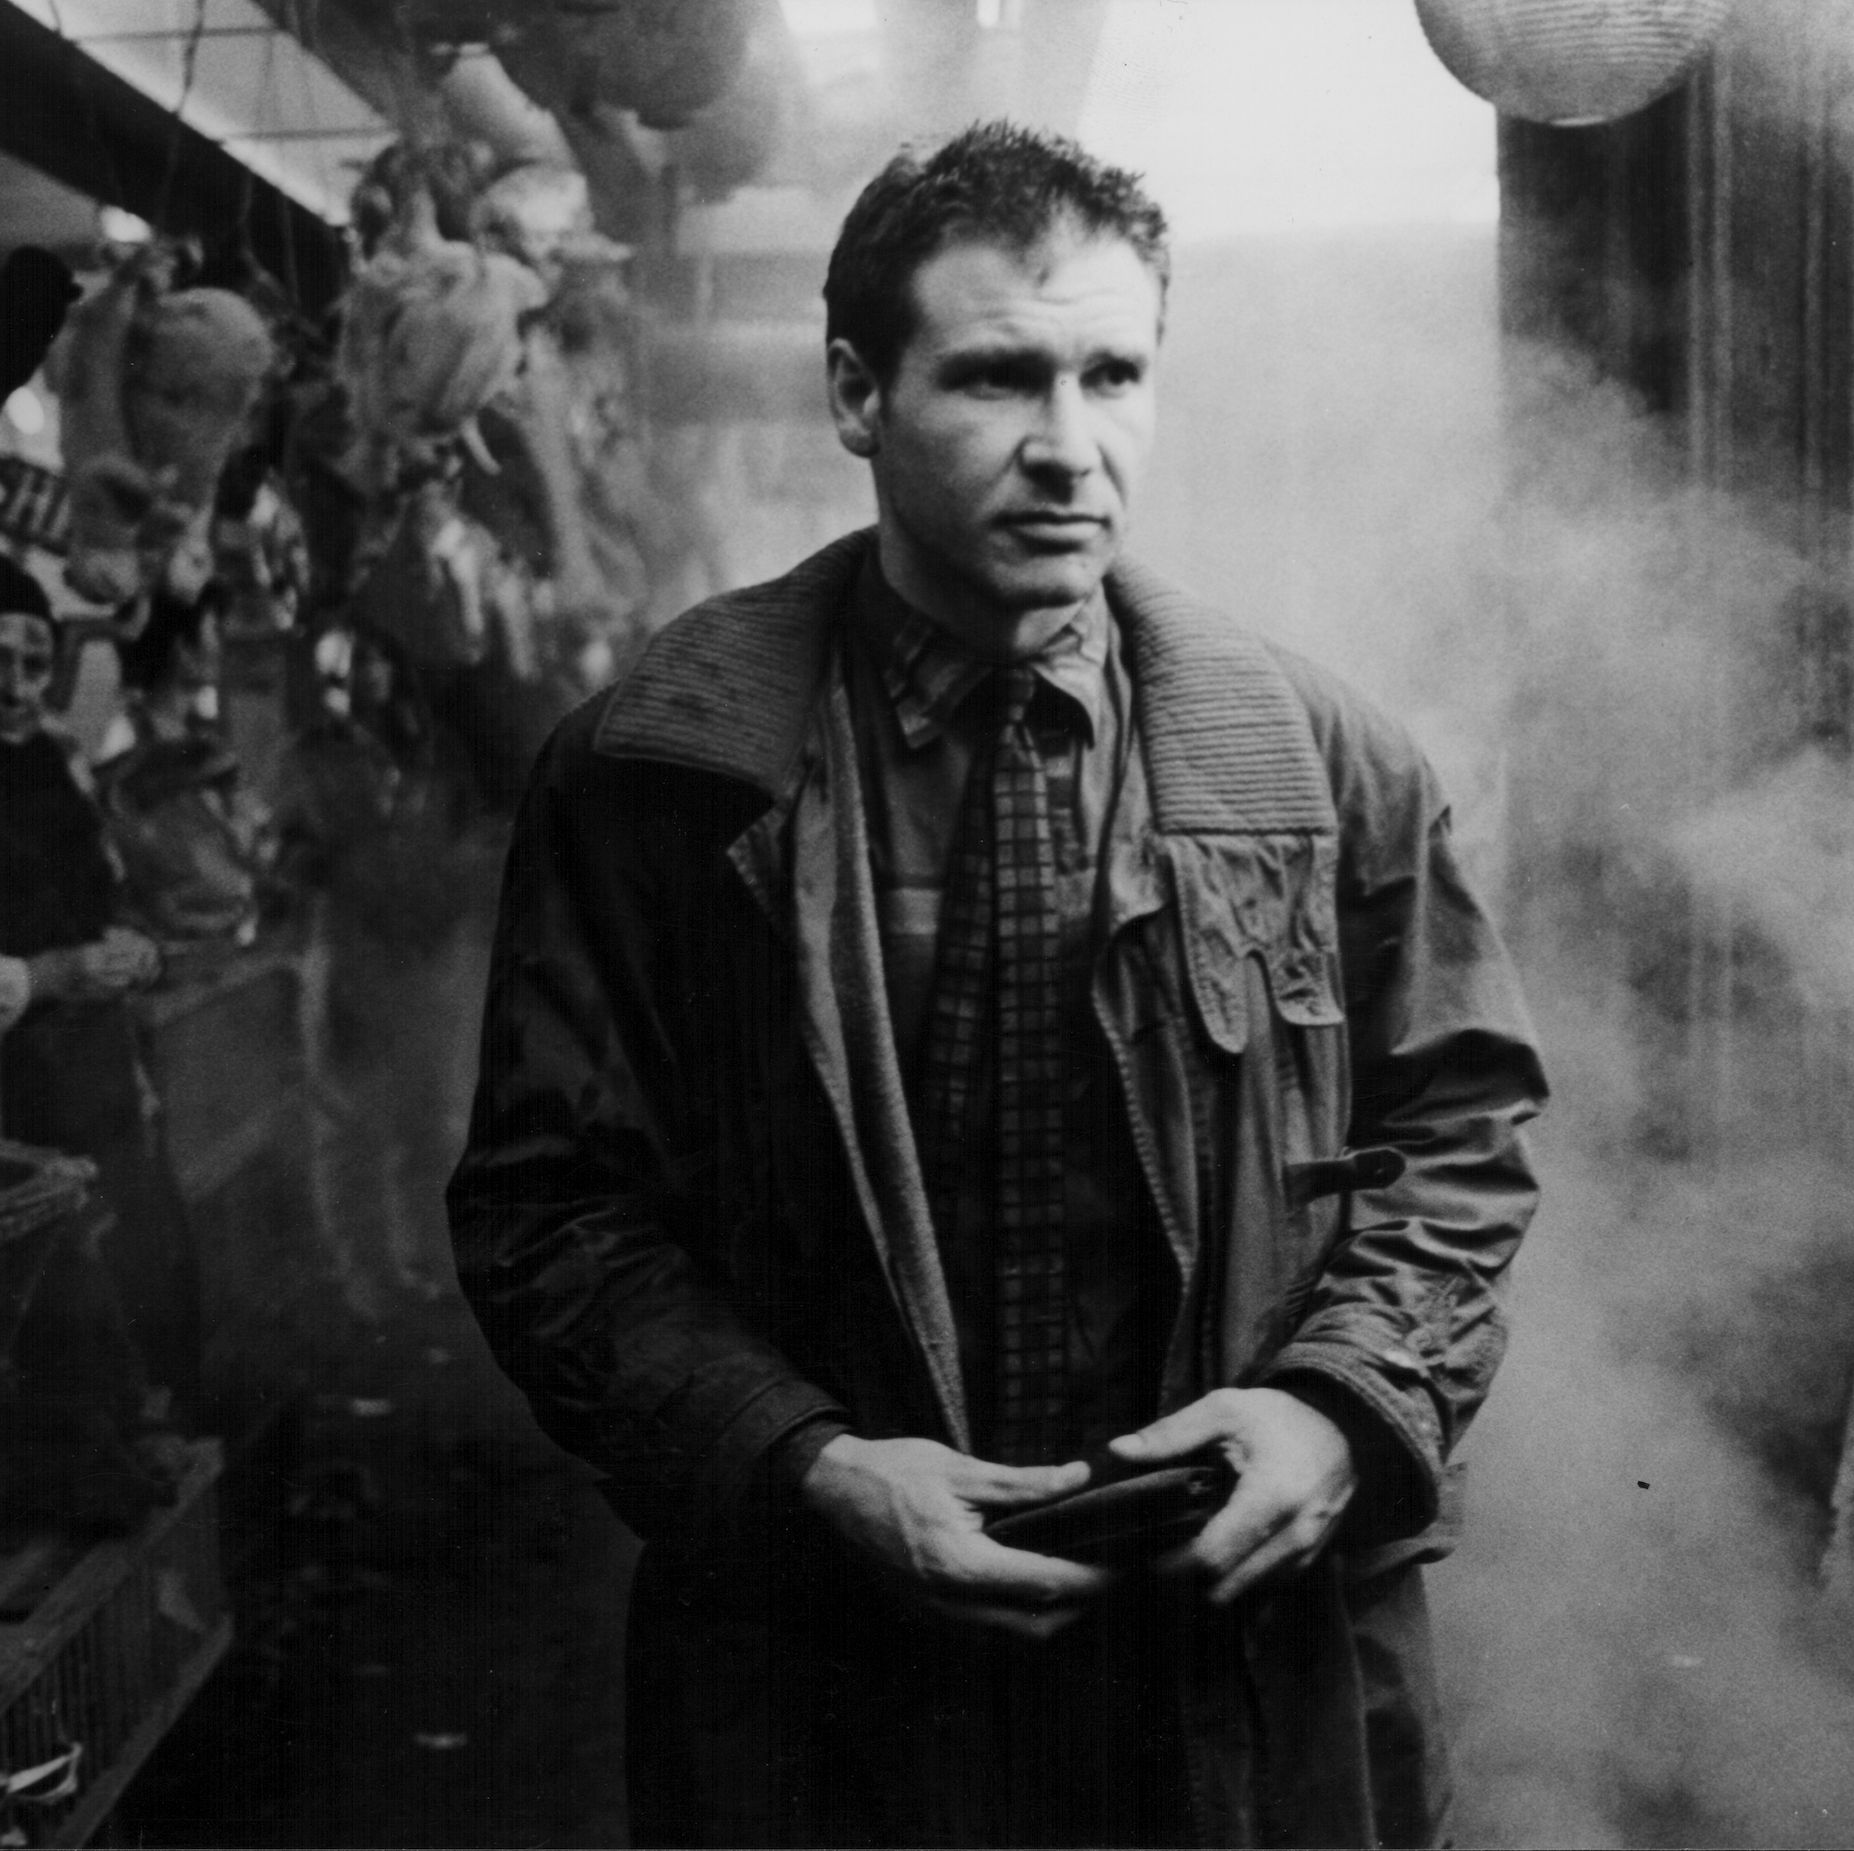 'Blade Runner' at 40: Why the Ridley Scott Masterpiece is Still the Greatest Sci-Fi of All-Time